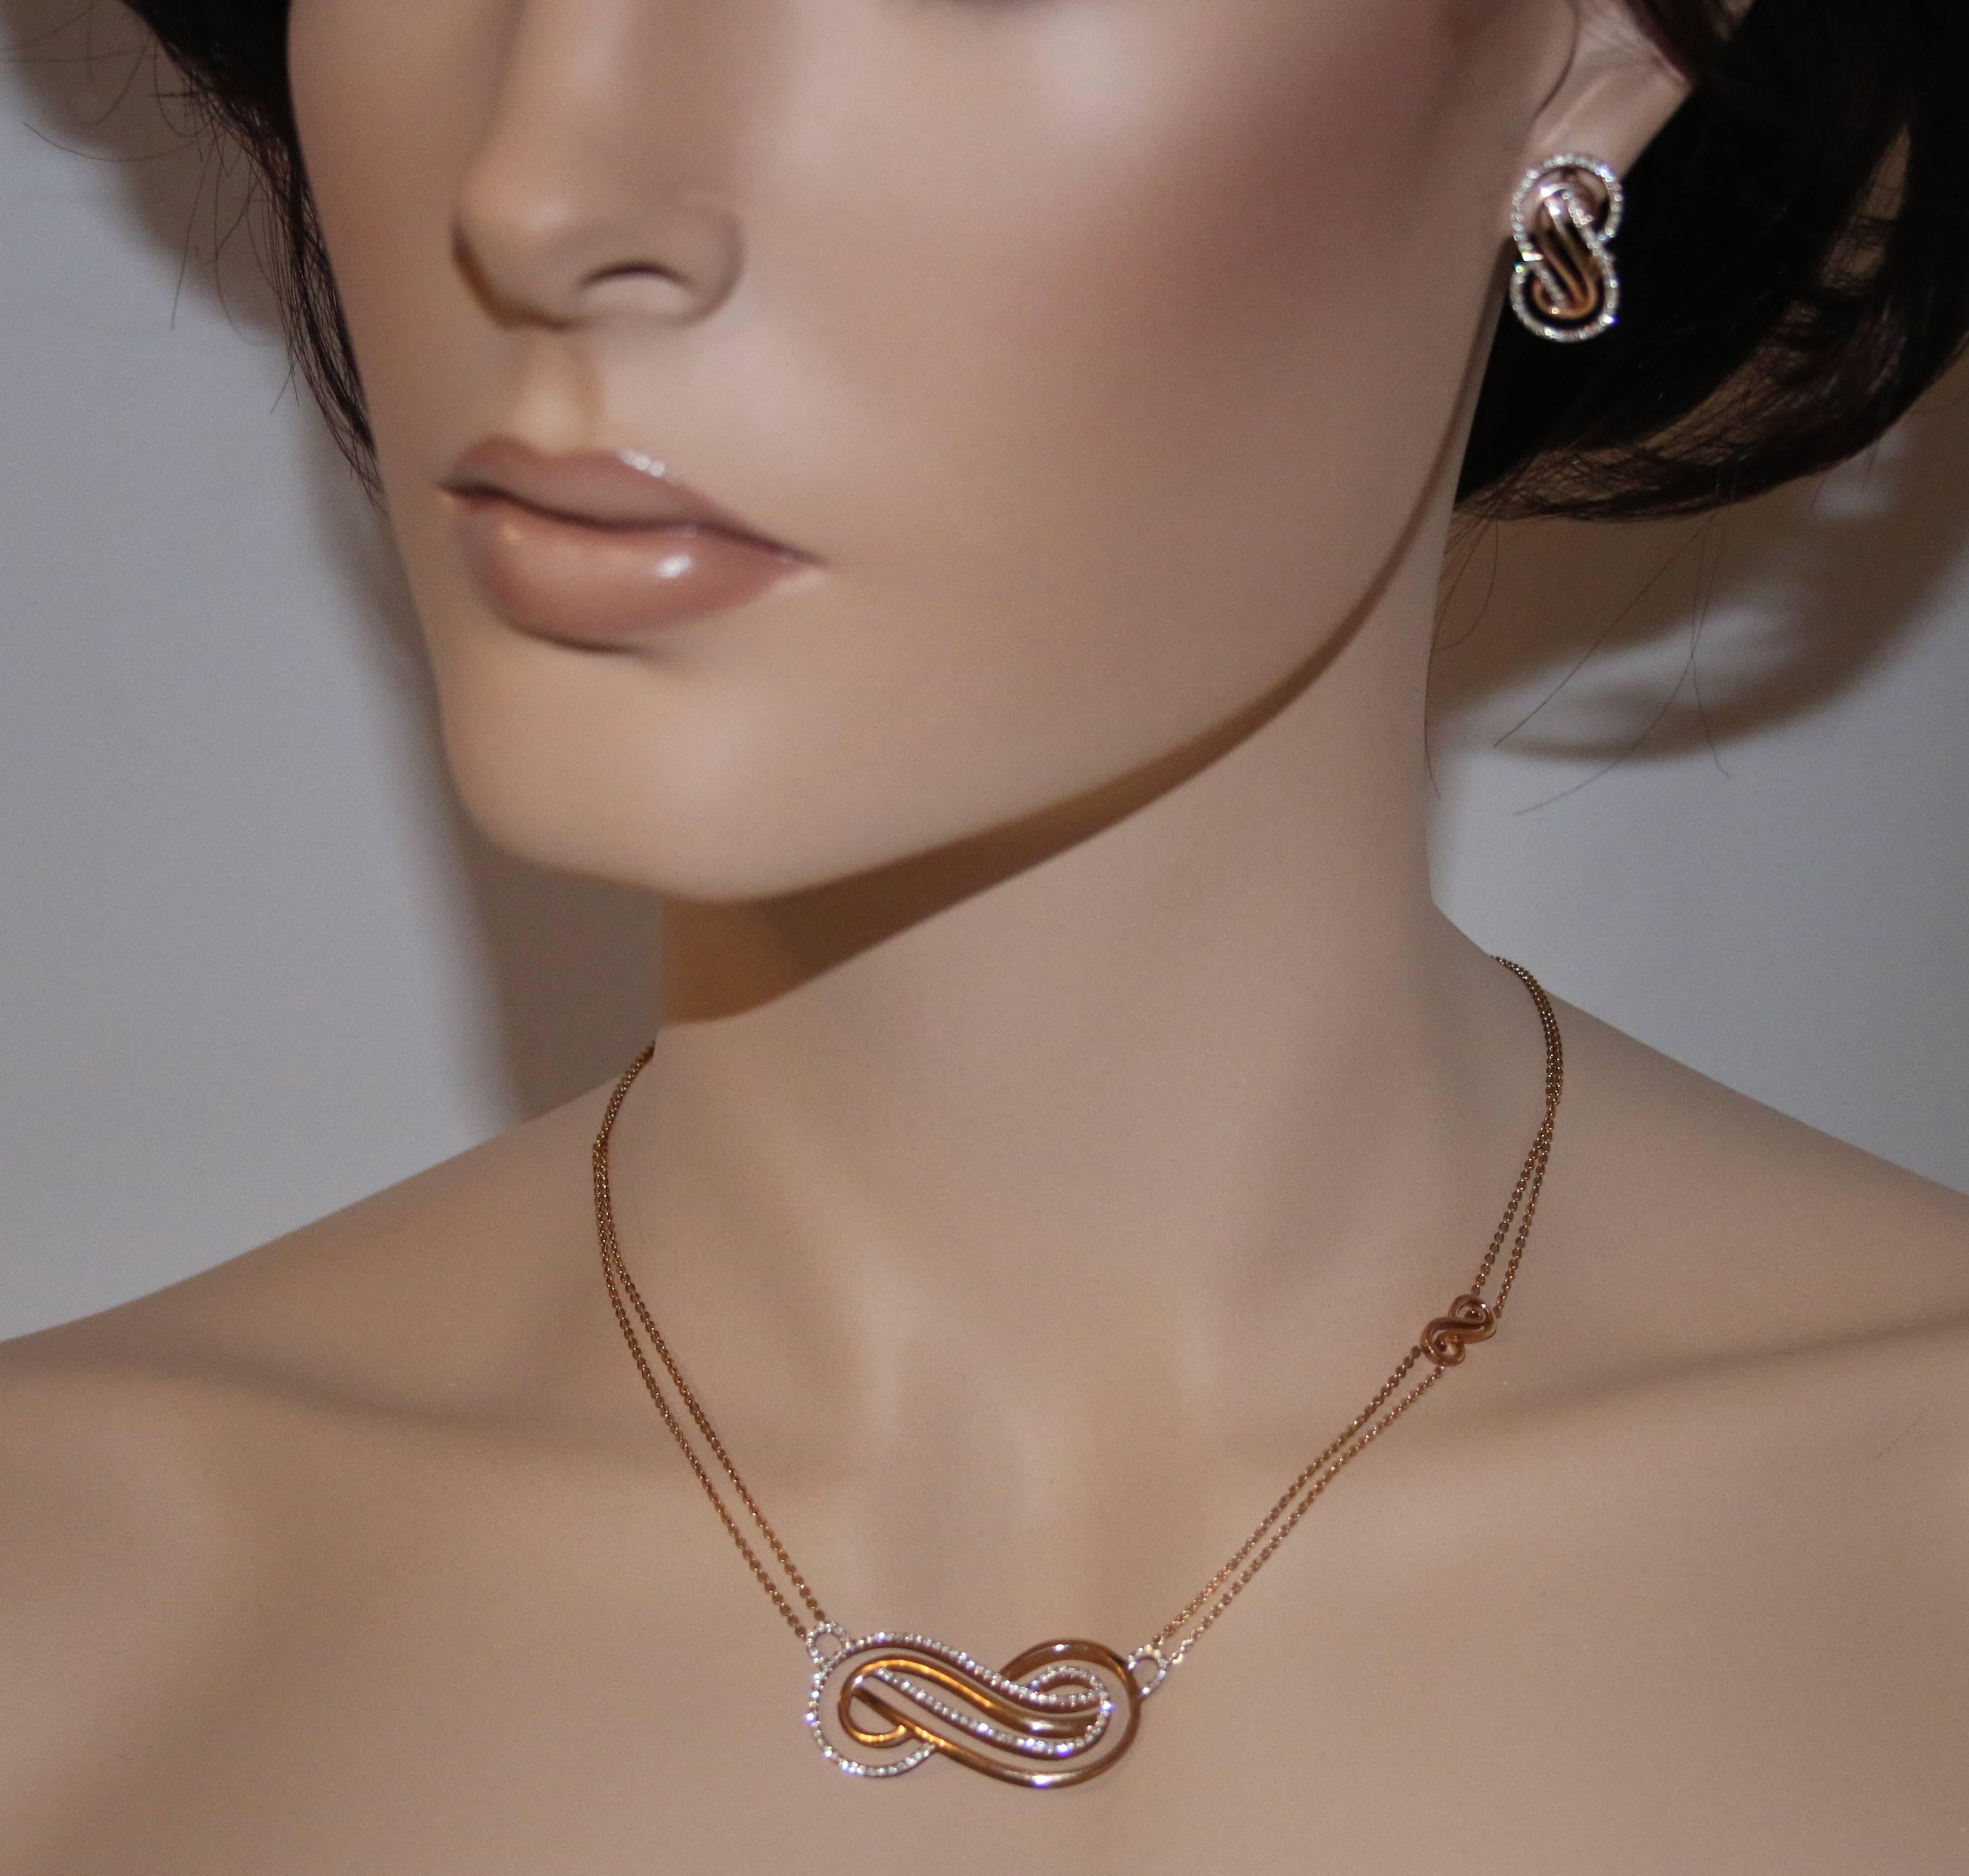 Women's 0.96 Carat Diamond Rose Gold Infinity Necklace and Earrings Set For Sale